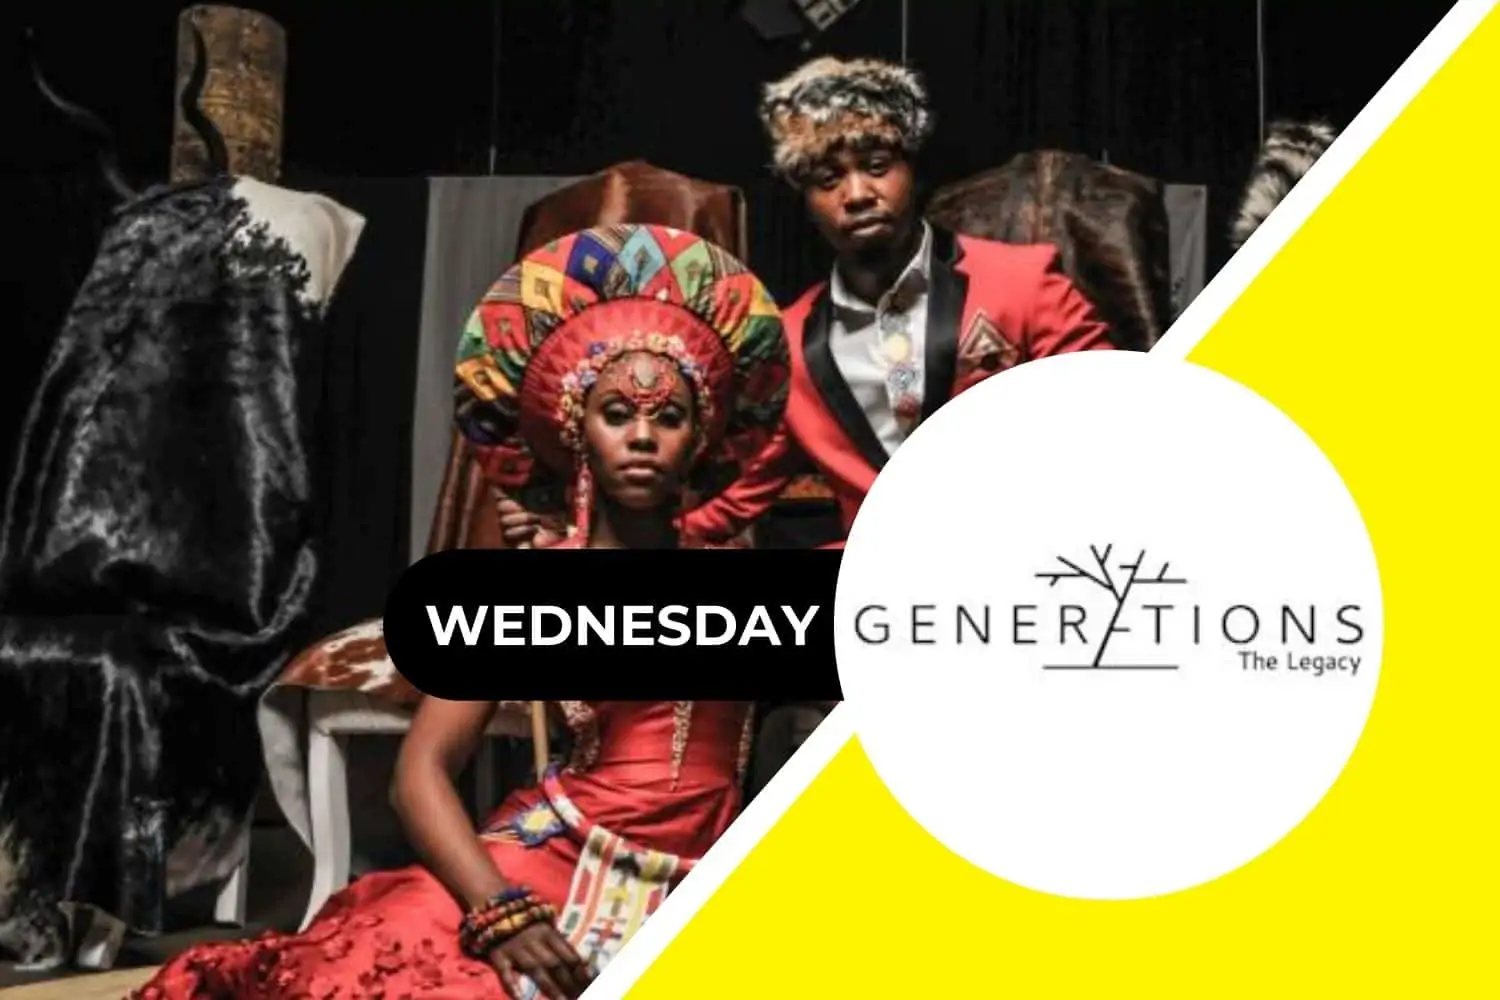 On today's episode of Generations, Wednesday.